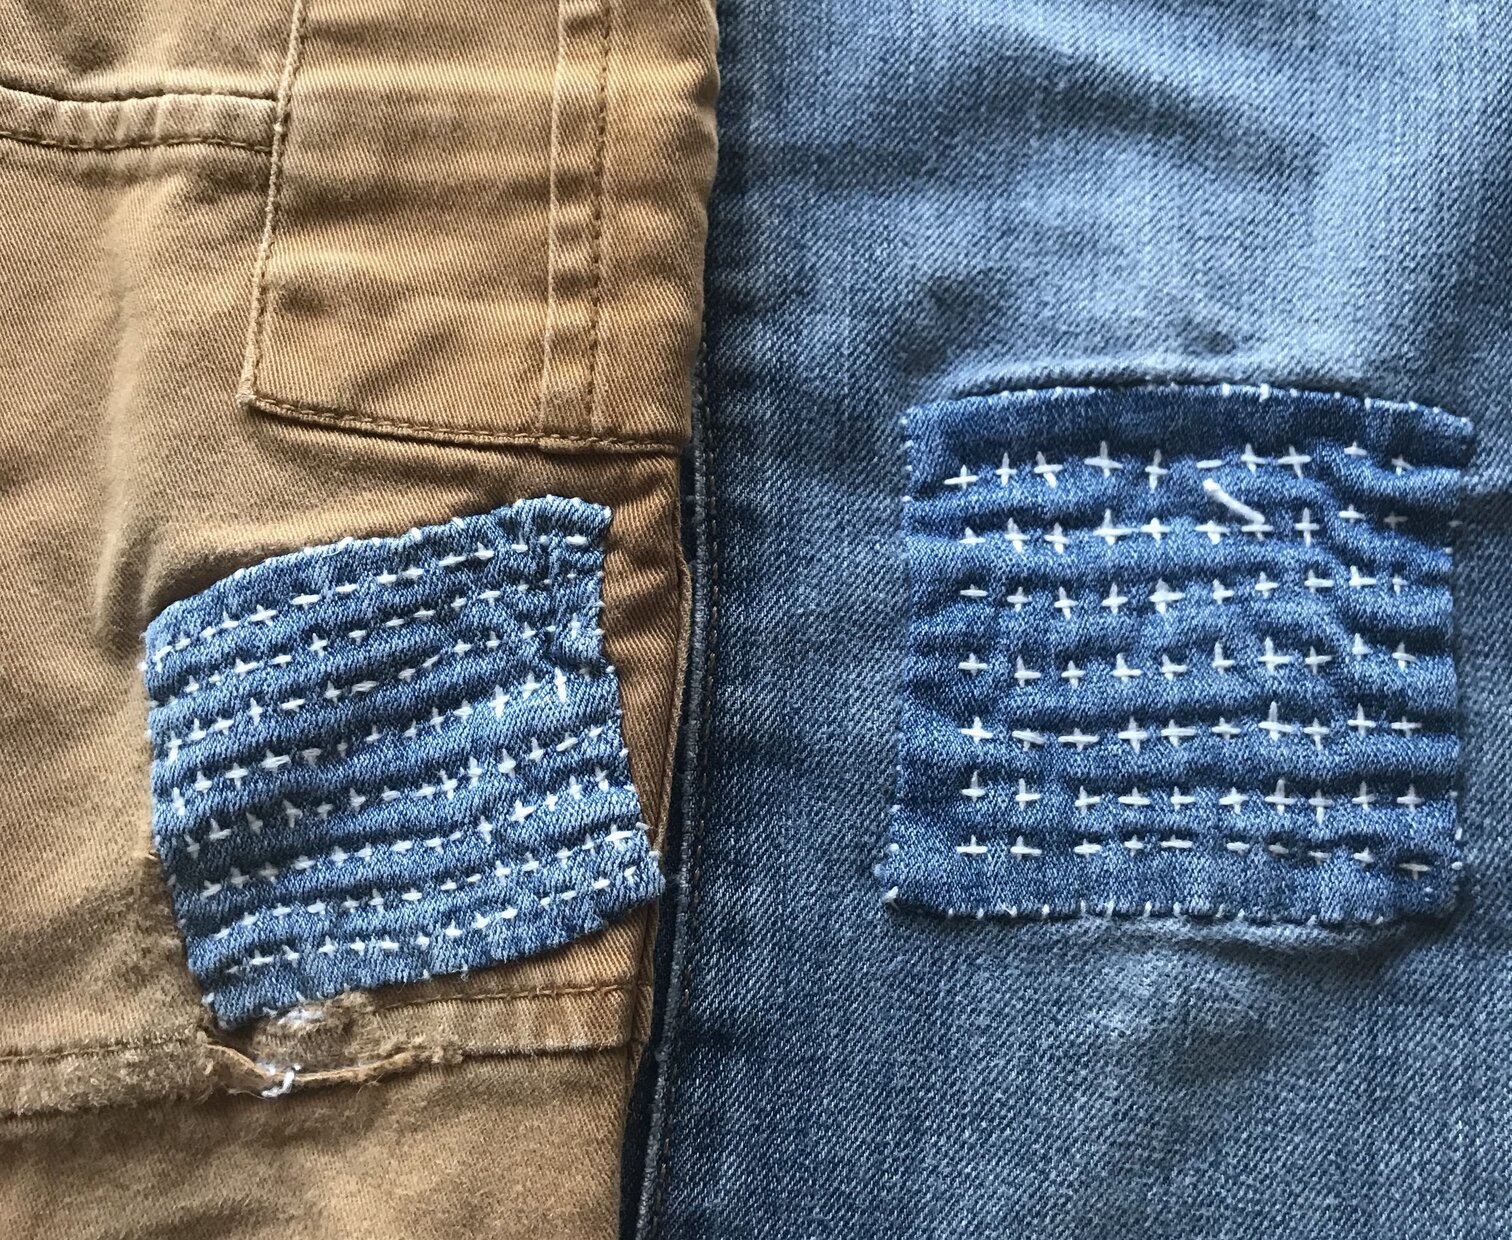 How to Fix Ripped Jeans with Visible Mending // Sashiko and Denim